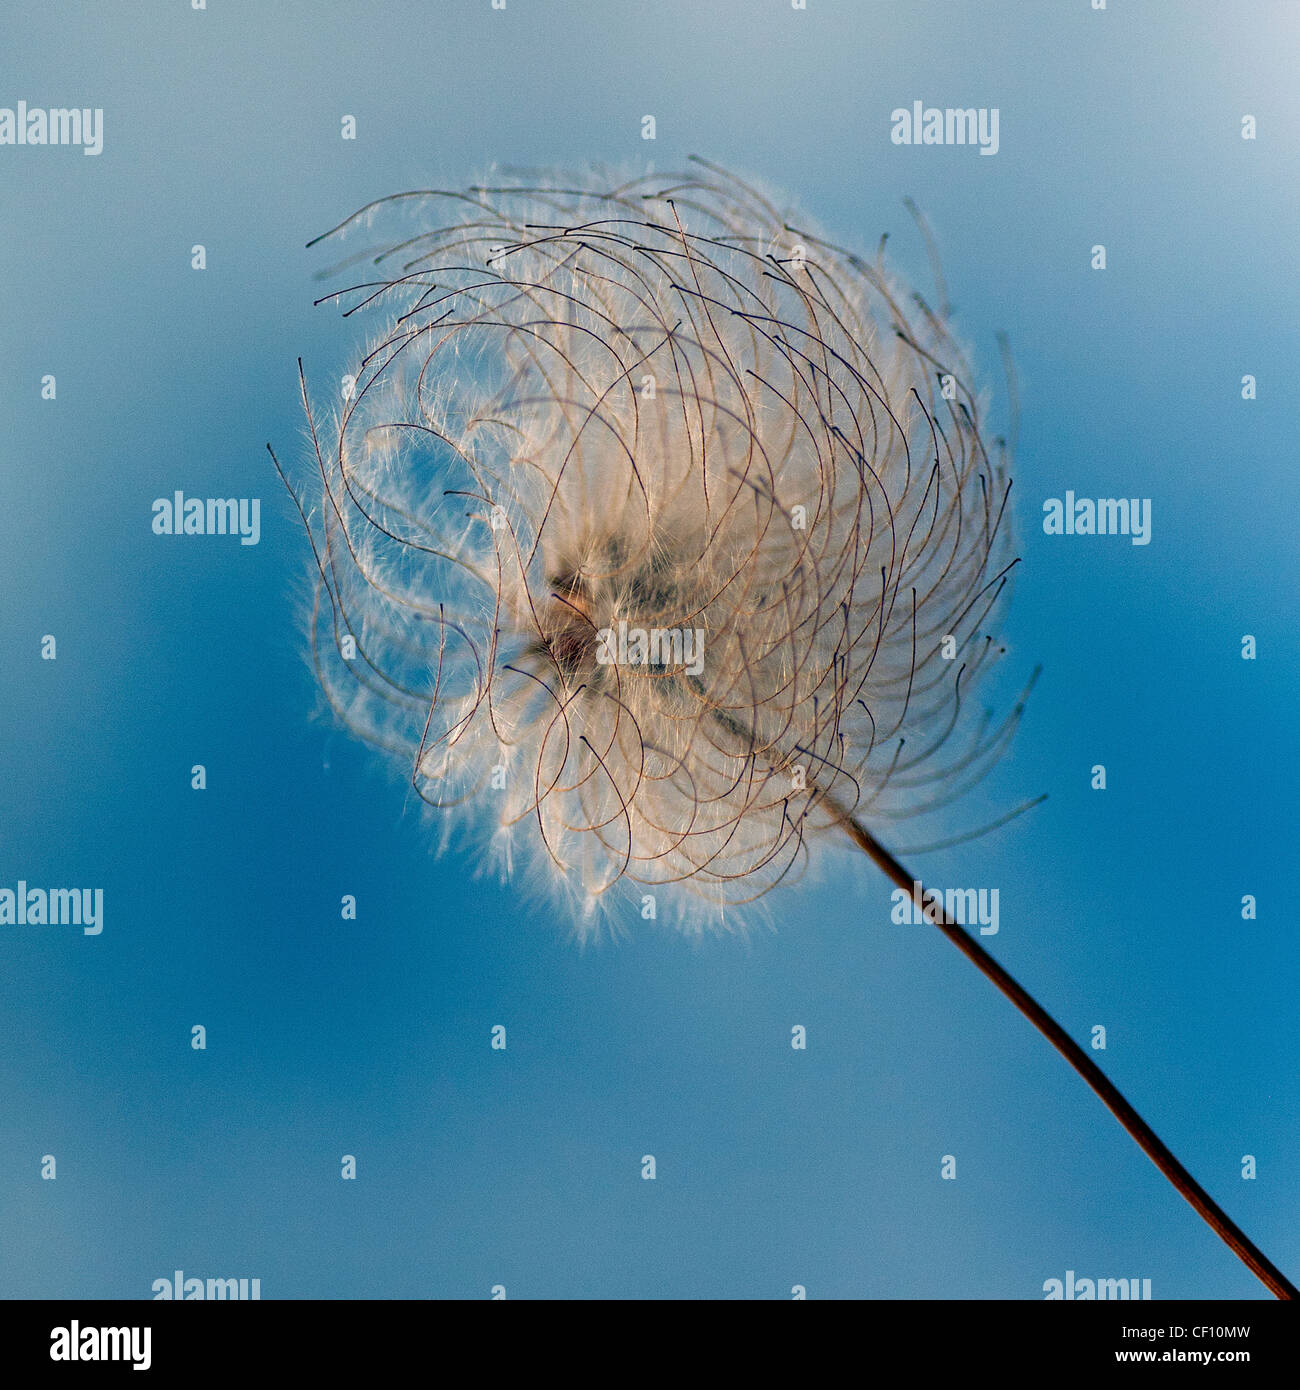 Macro photograph of the seed head of a clematis, often called Old Man's Beard because of the fine silky hairs. Stock Photo